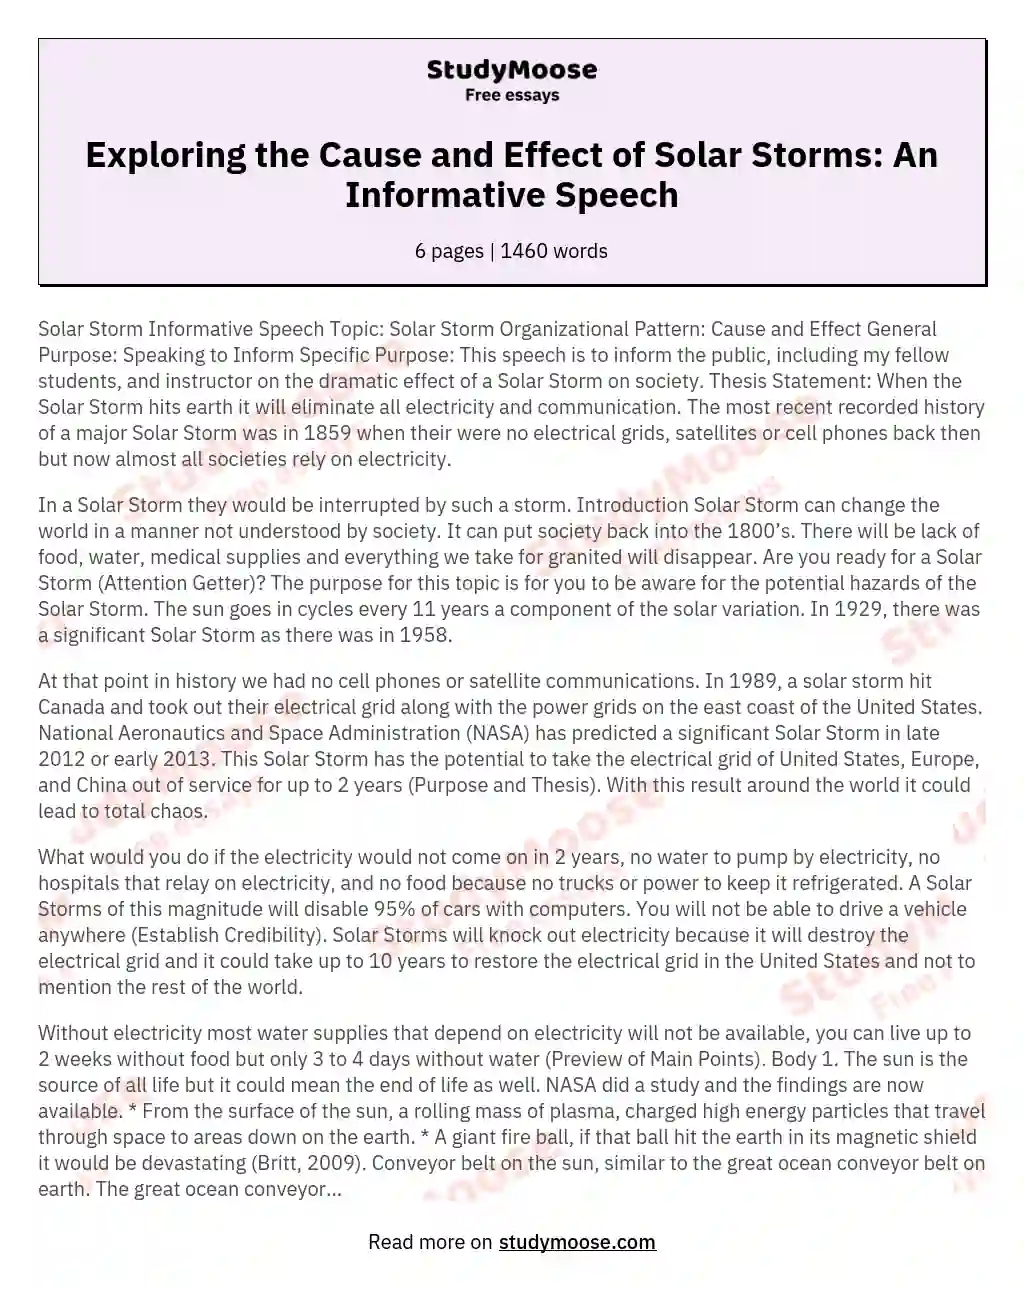 Exploring the Cause and Effect of Solar Storms: An Informative Speech essay